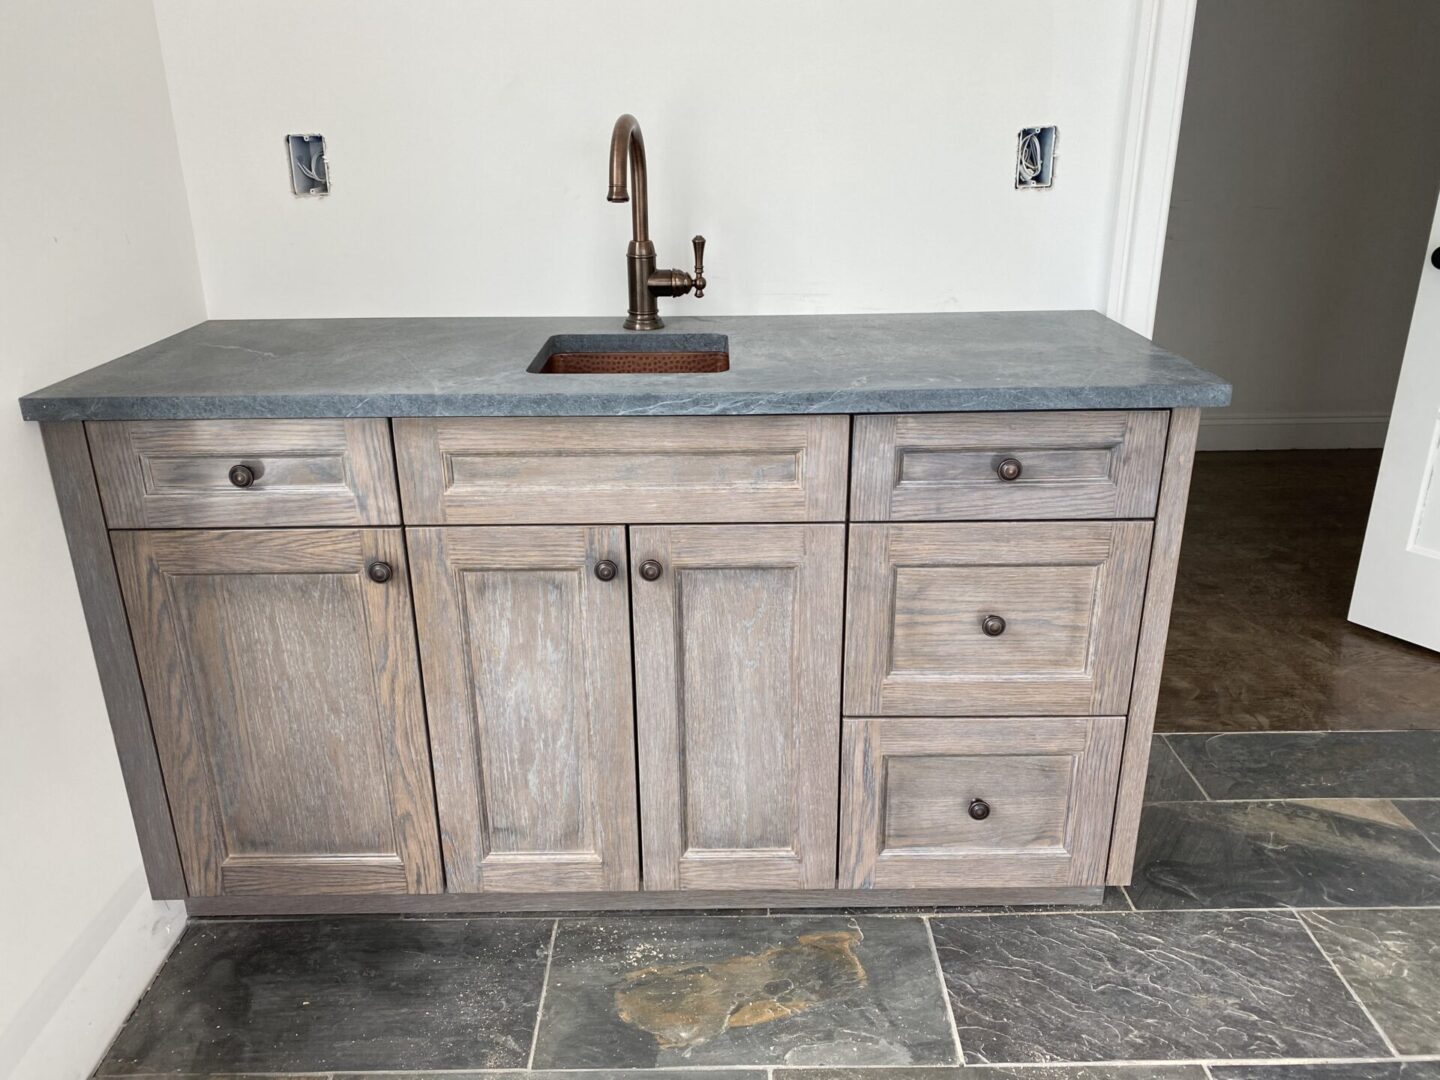 A sink under construction with gray marble and white interiors